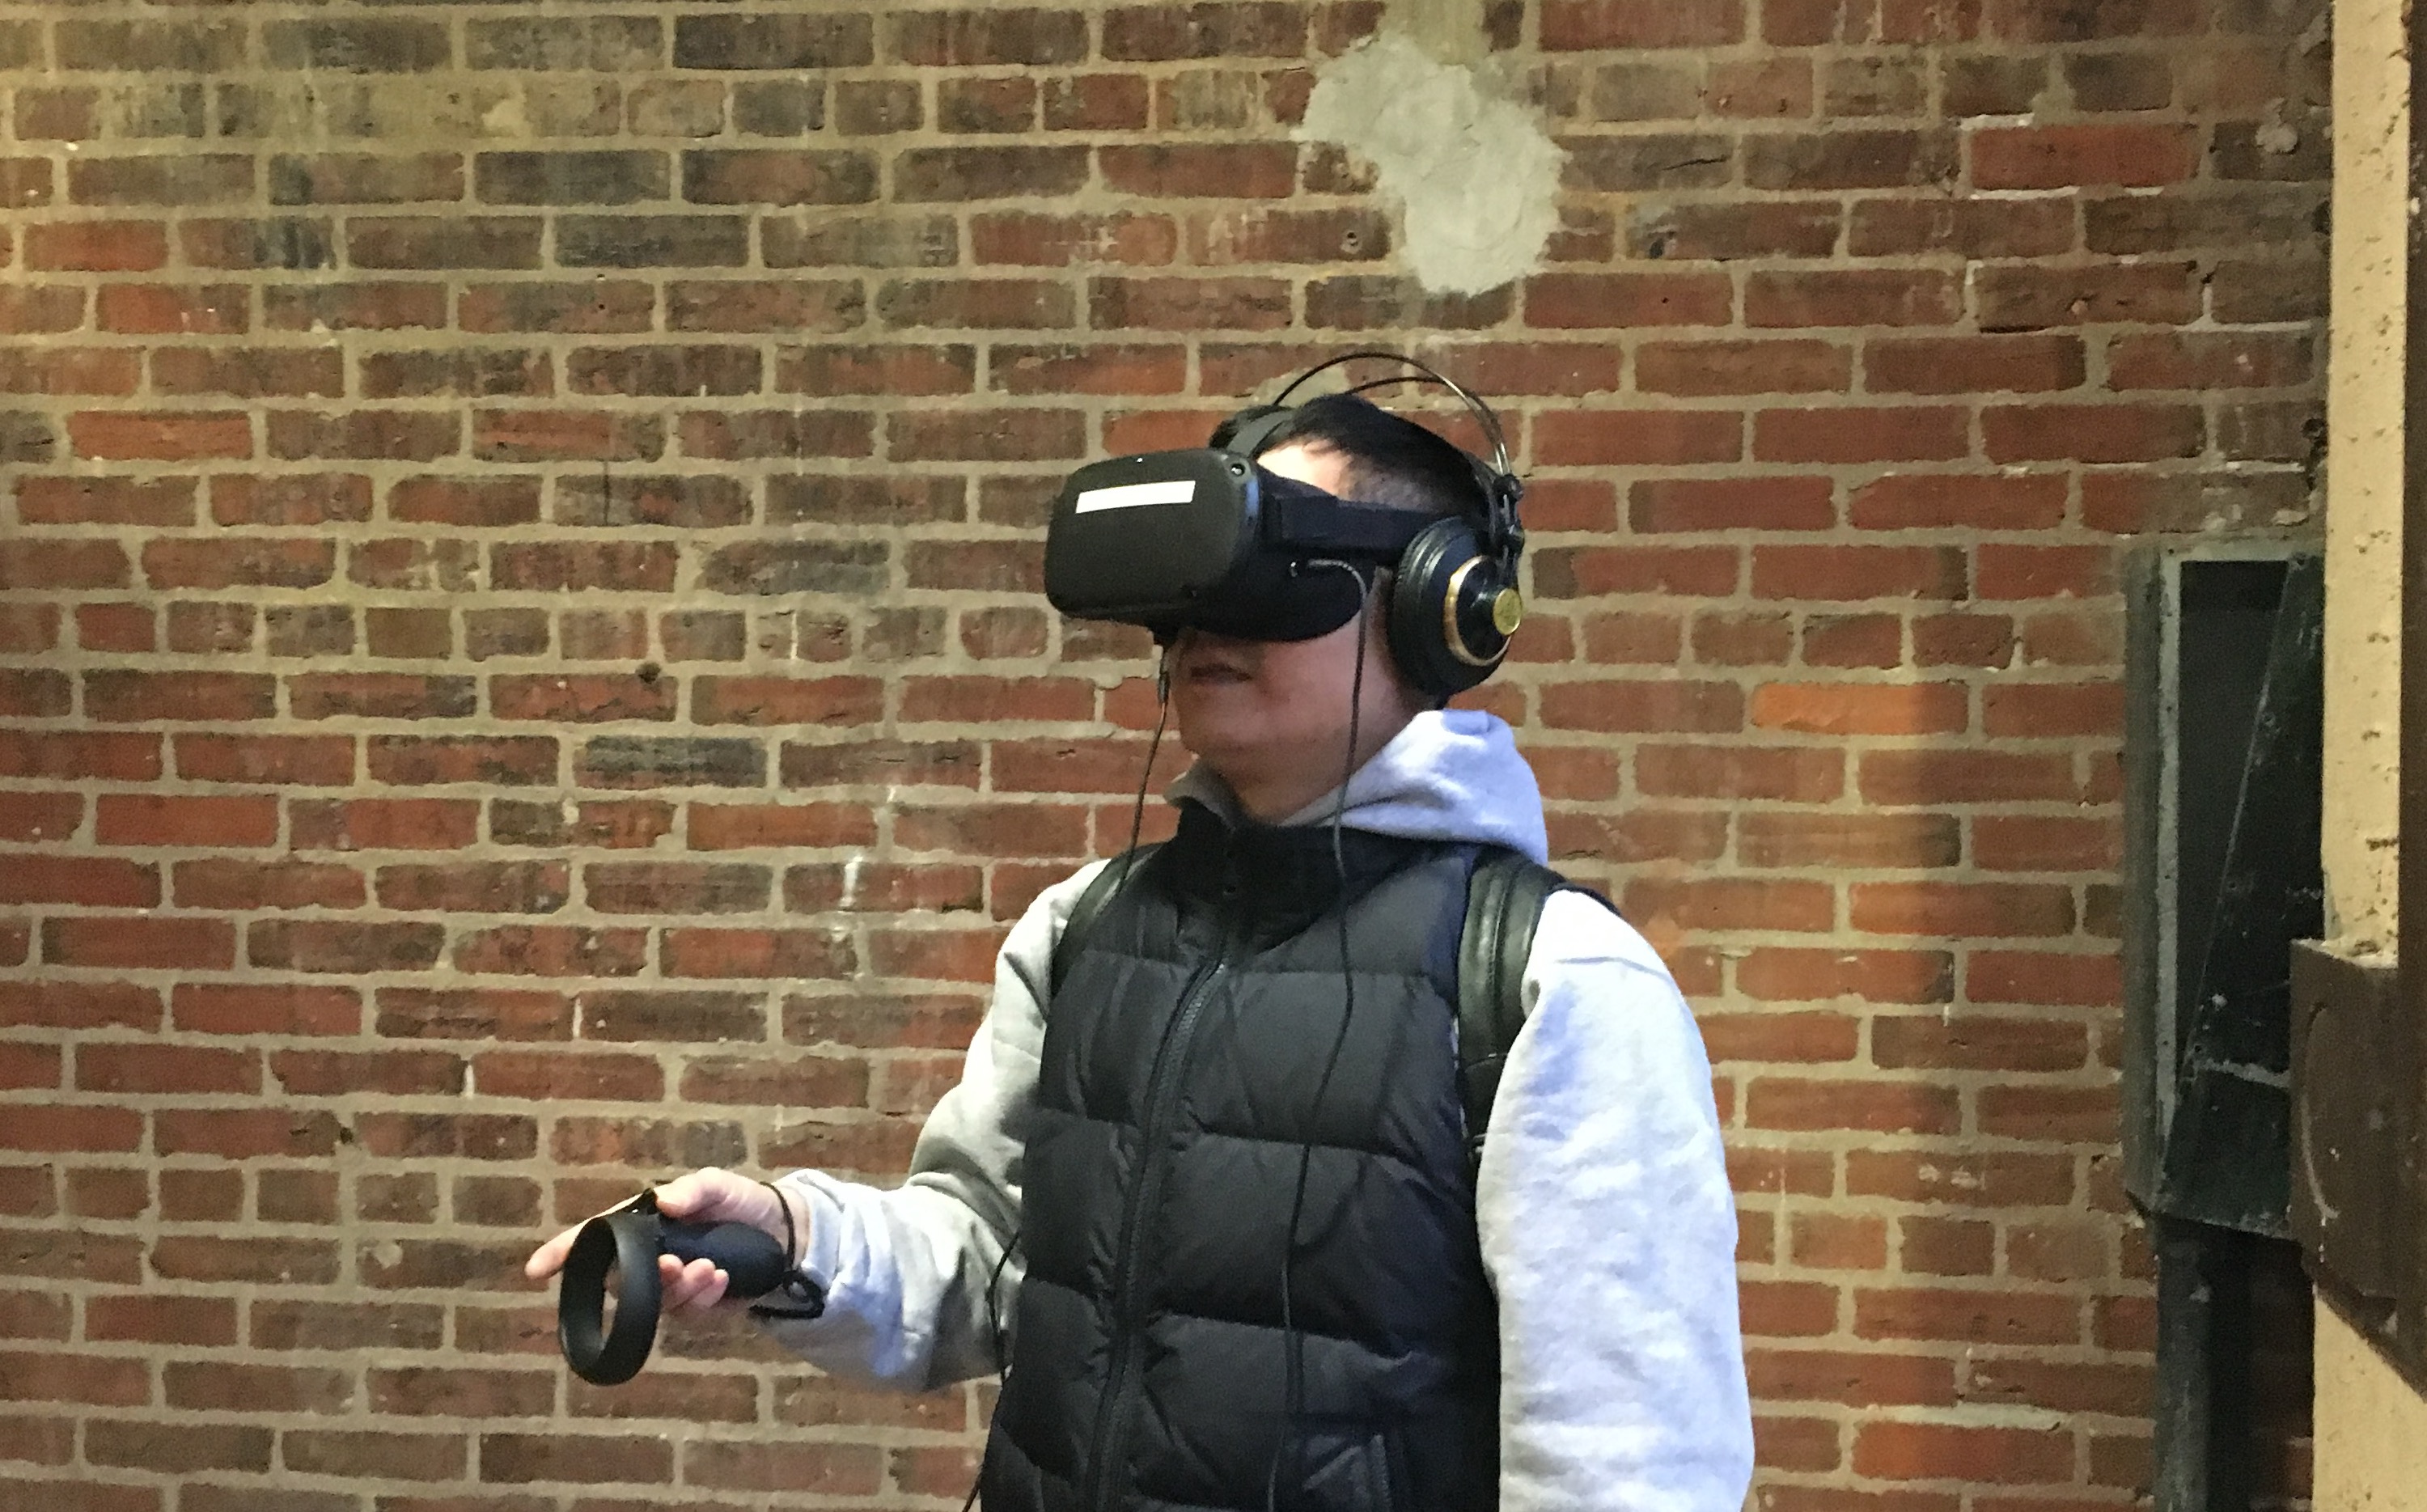 VR user with headset